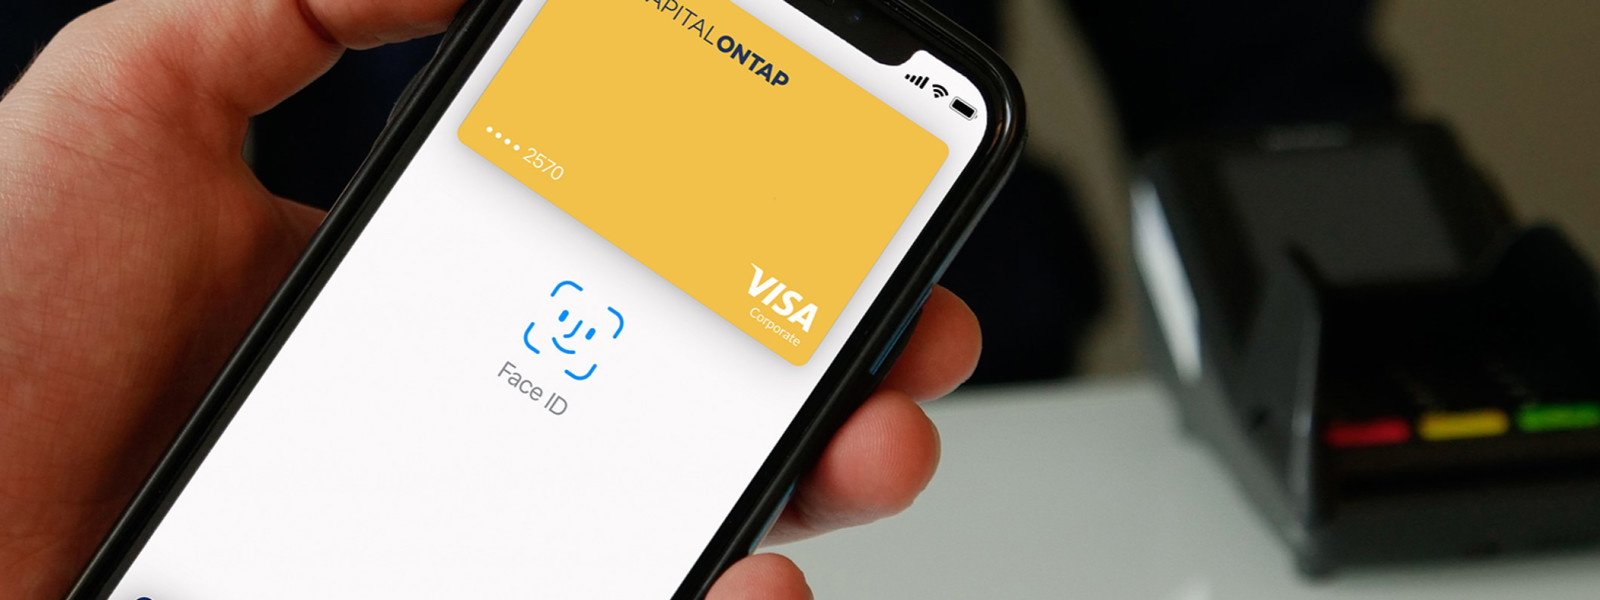 Face ID being activated to use Apple Pay on a mobile phone